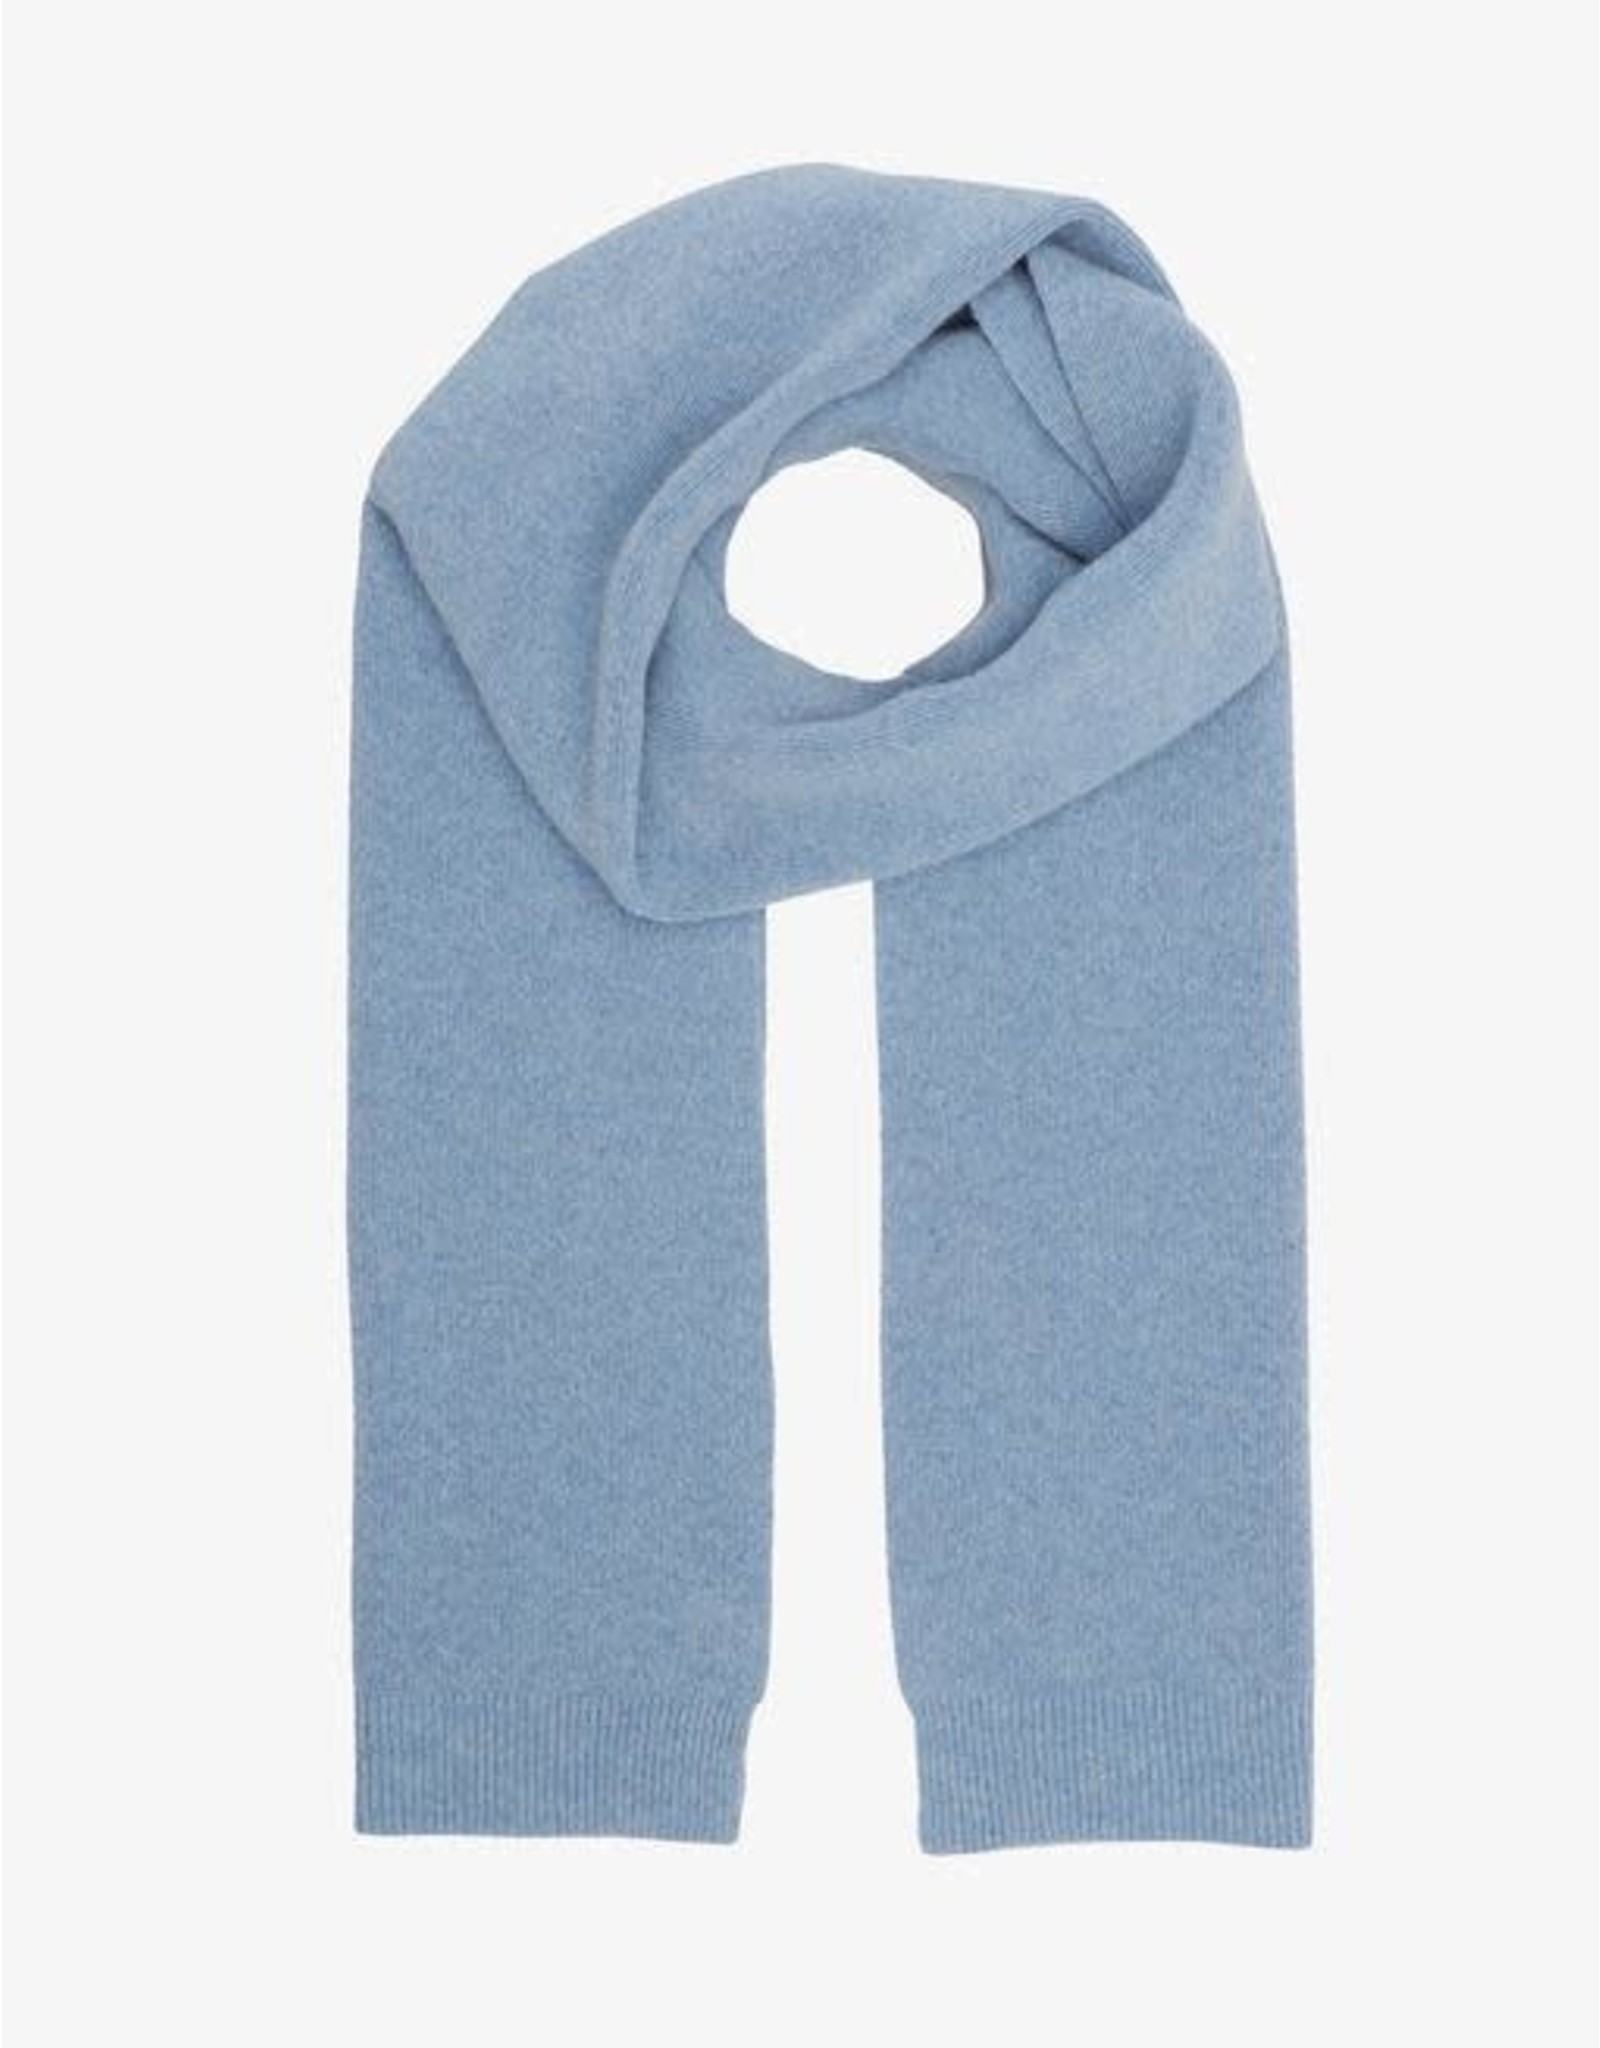 BGS Colorful Standard - Recycled Merino Wool Scarf - 5 Colours